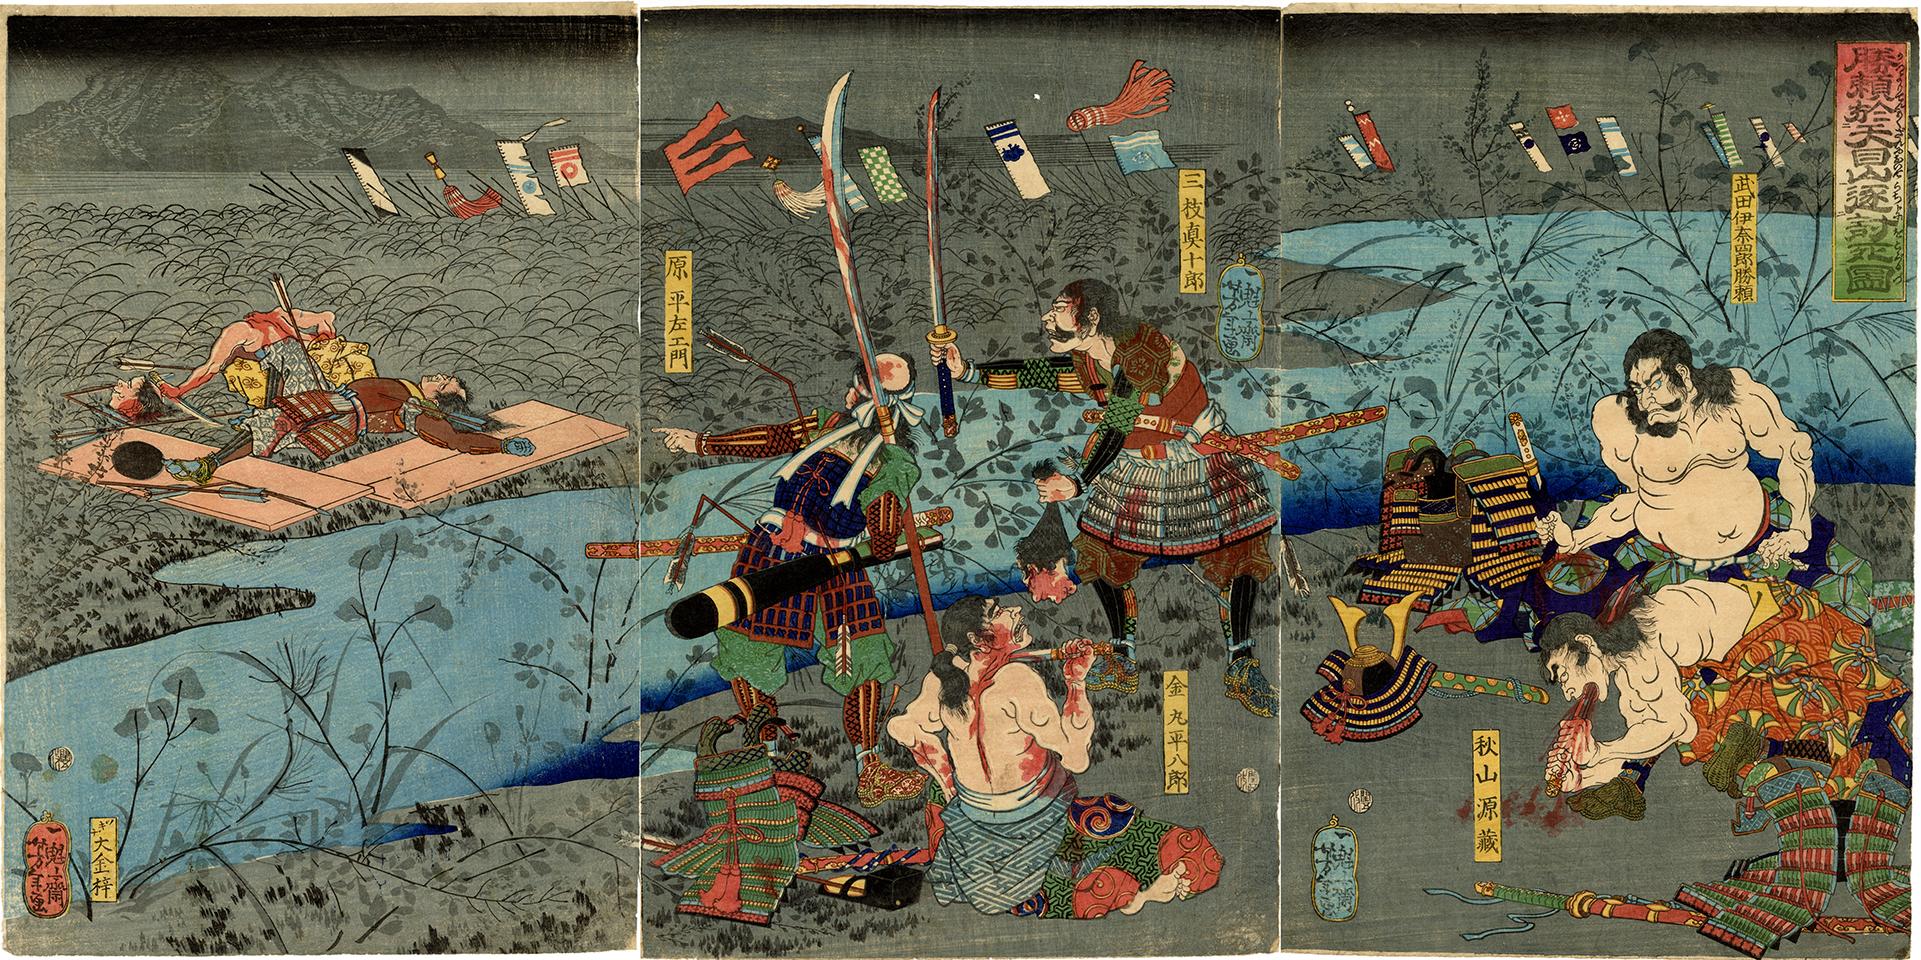 Taiso Yoshitoshi Landscape Print - Death in Battle by Suicide